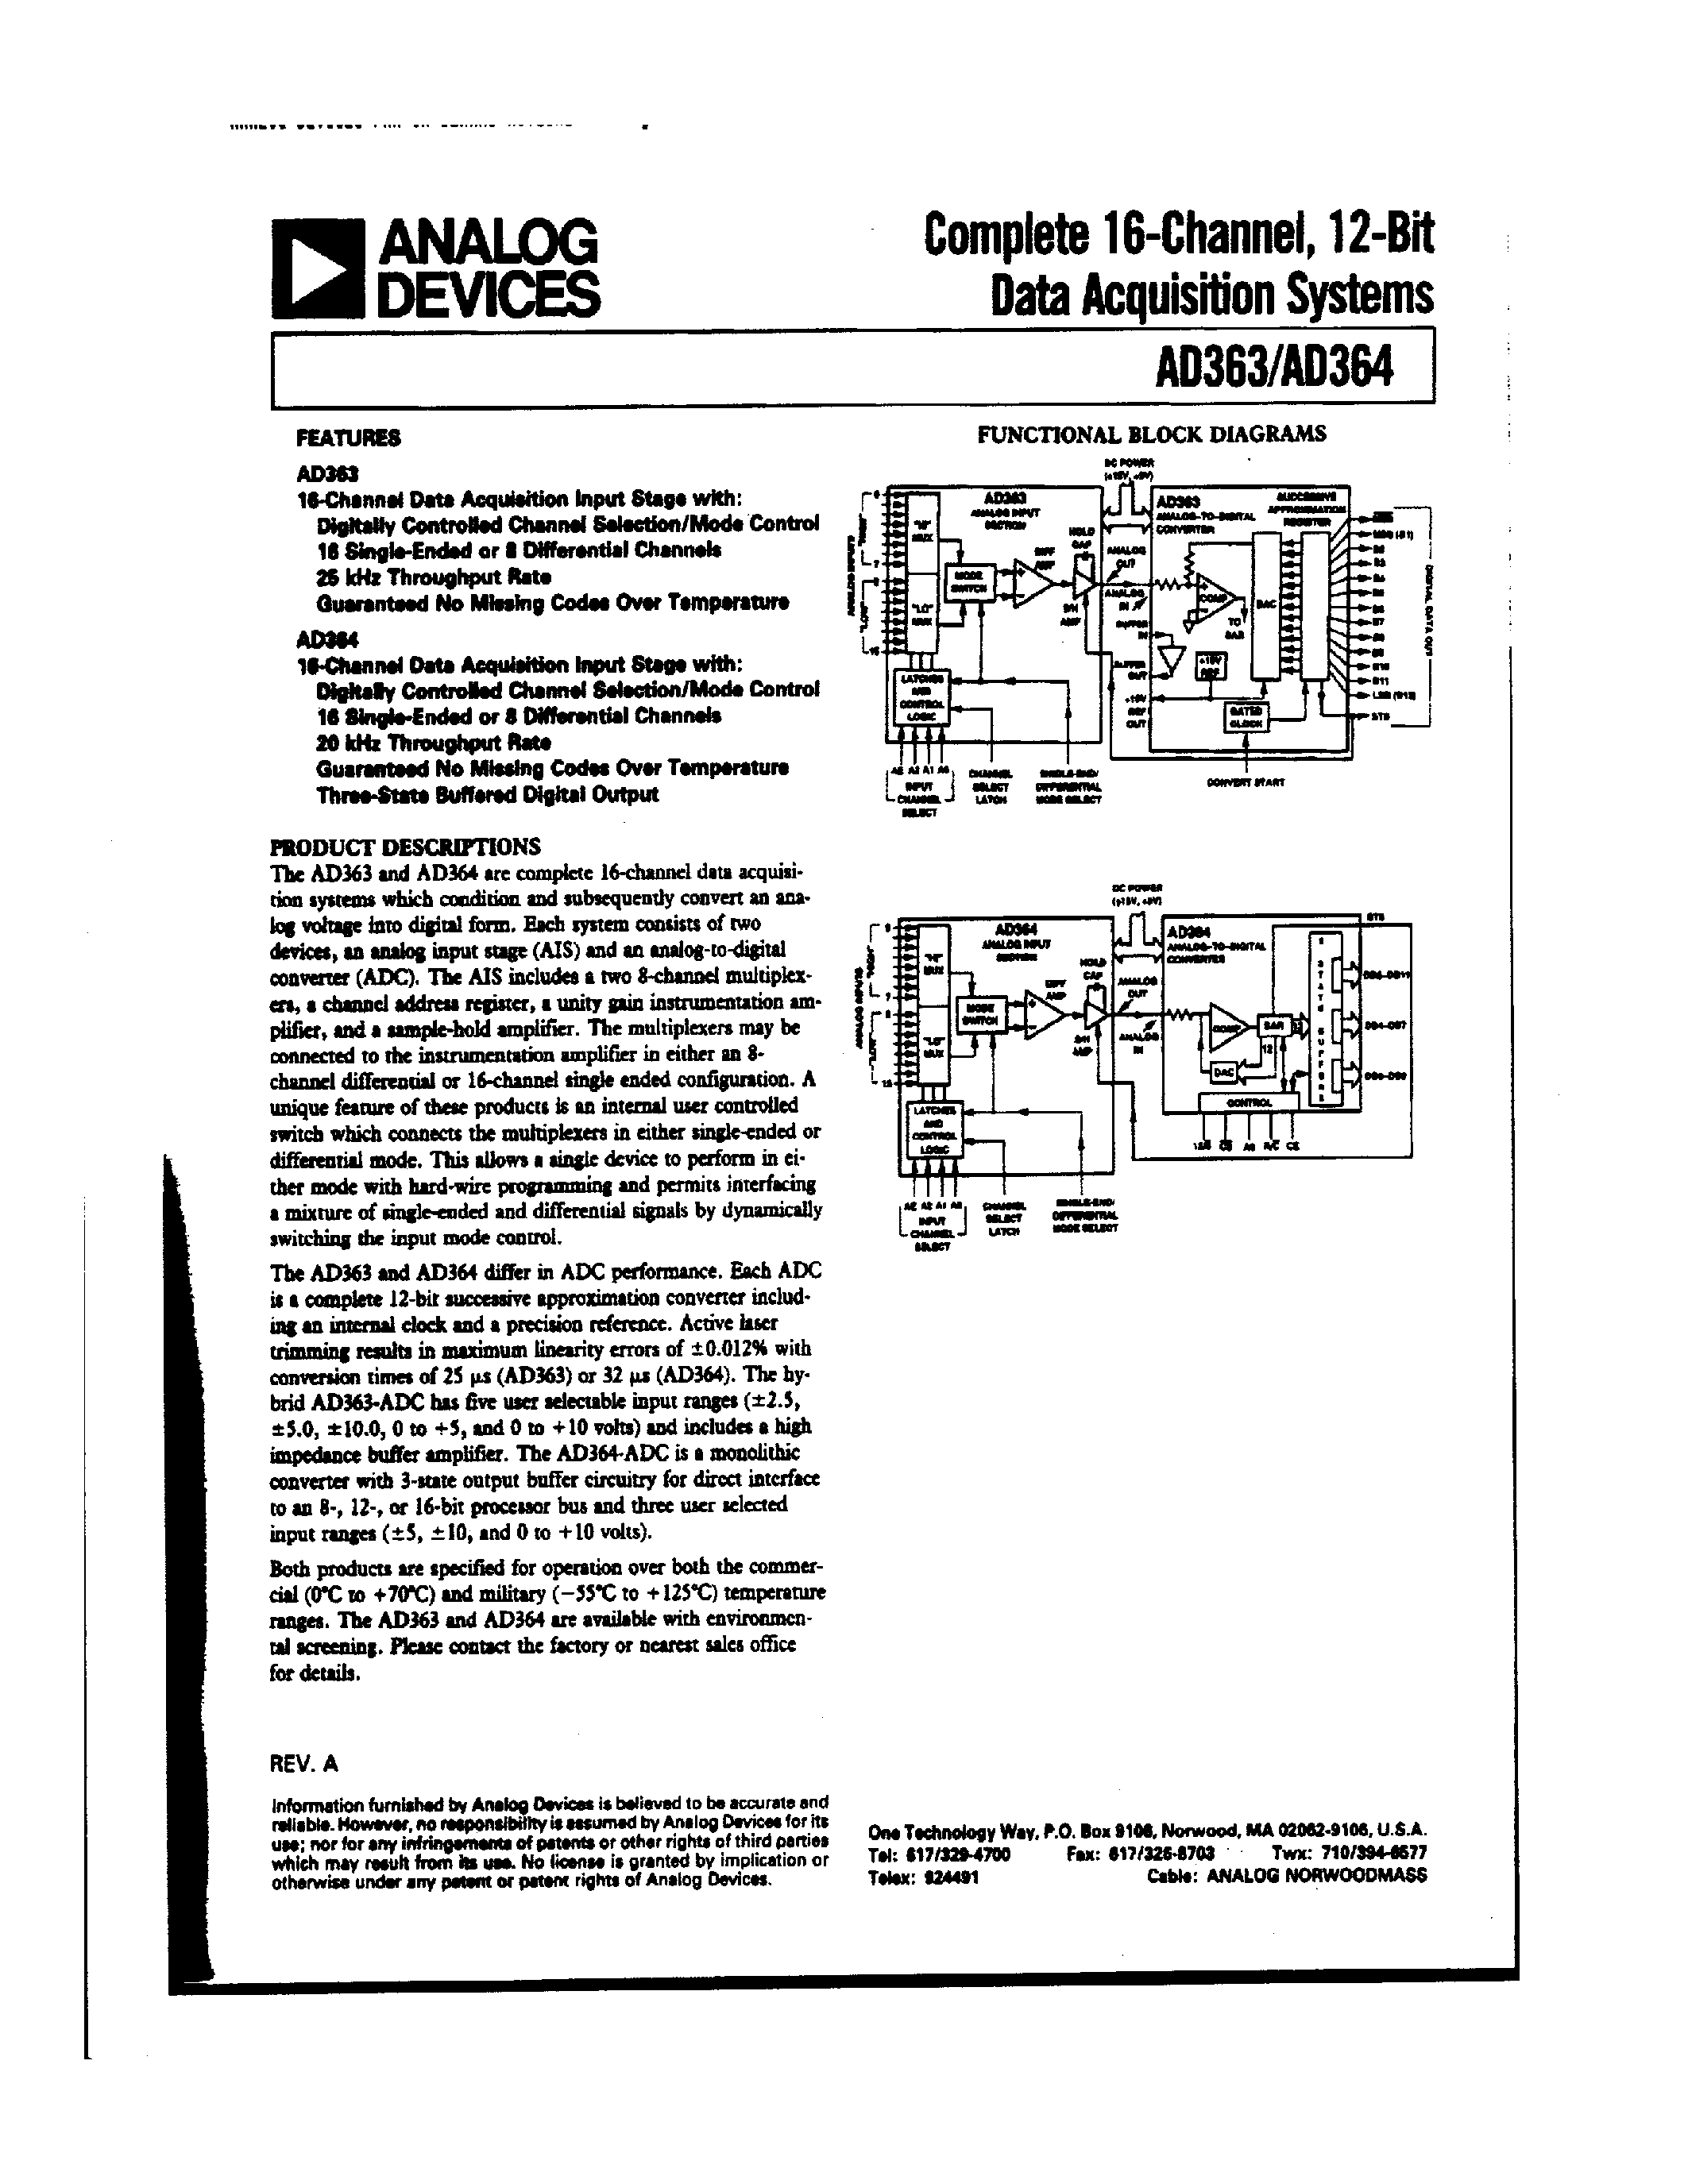 Datasheet AD364RS - Complete 16-Channel/12-Bit Data Acquisition System page 1